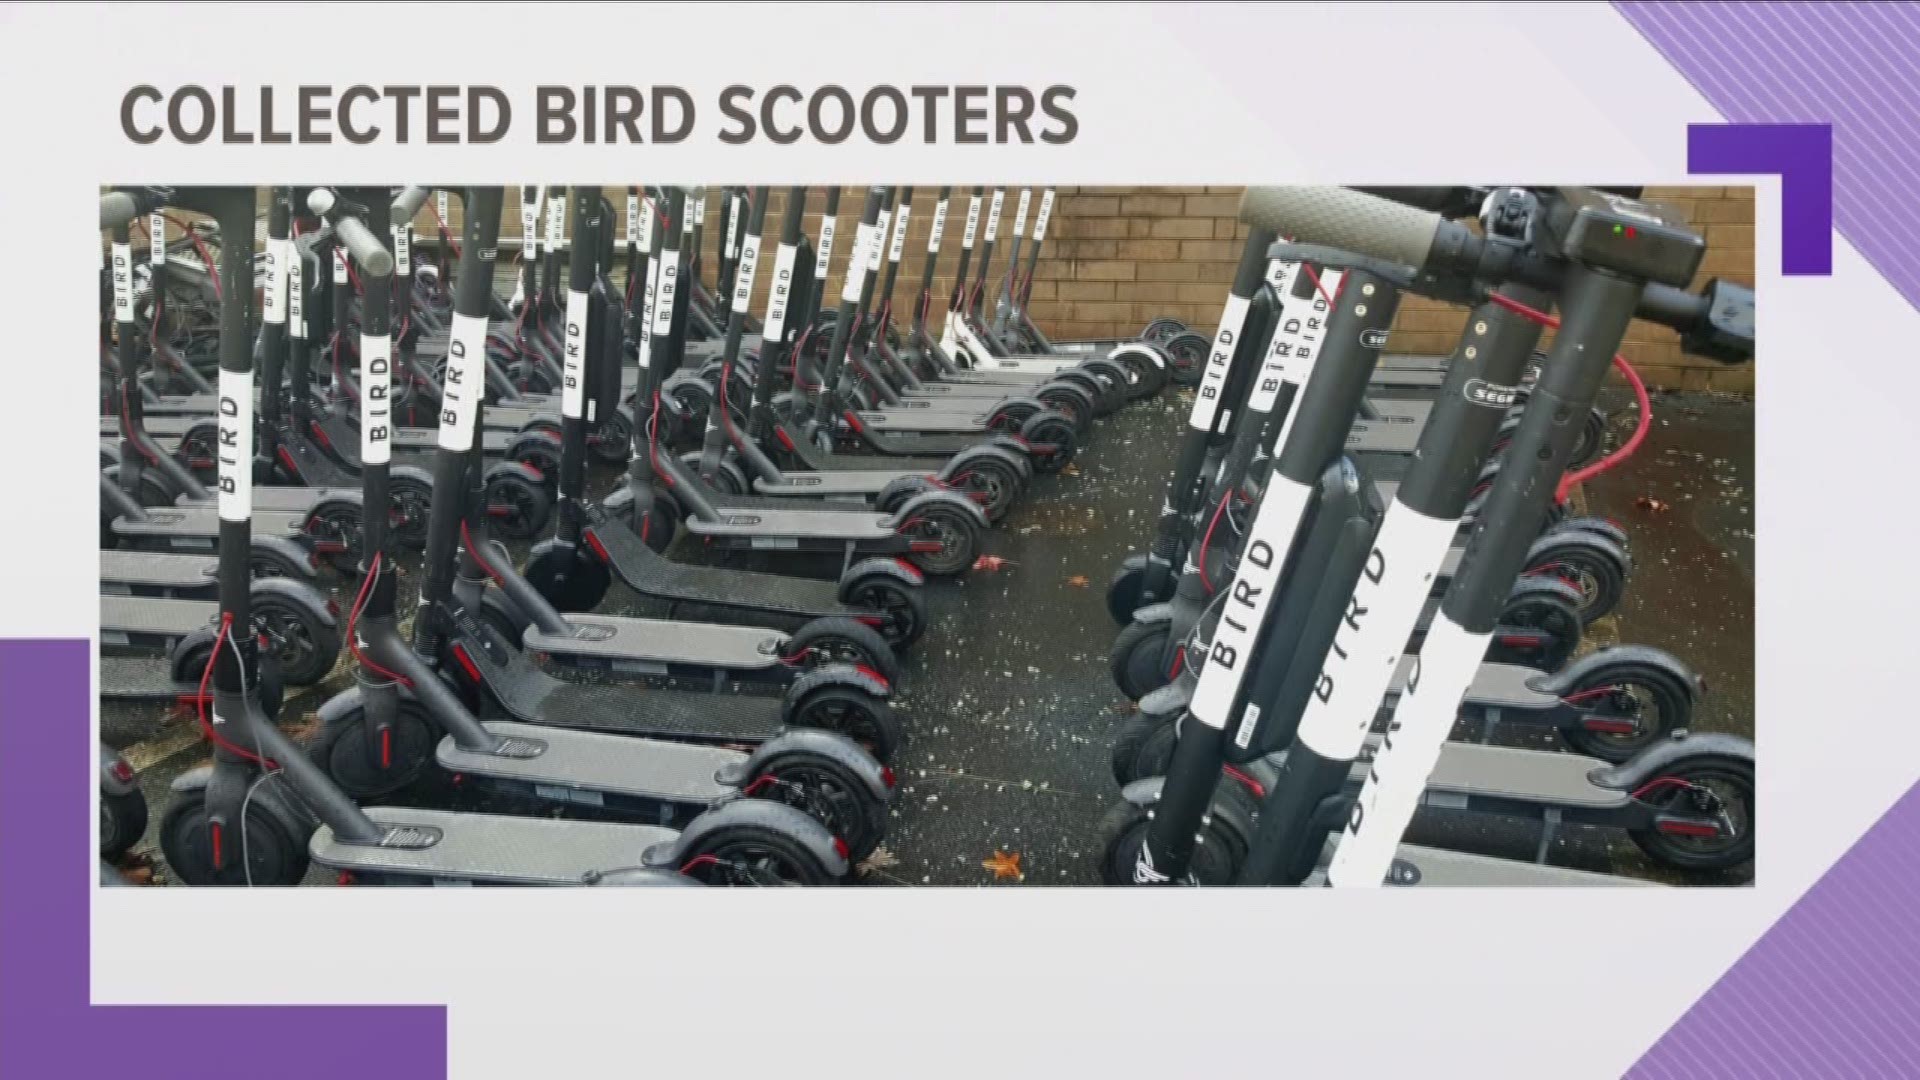 Greensboro has officially banned bird scooters, and one reason could be the dangers they can cause